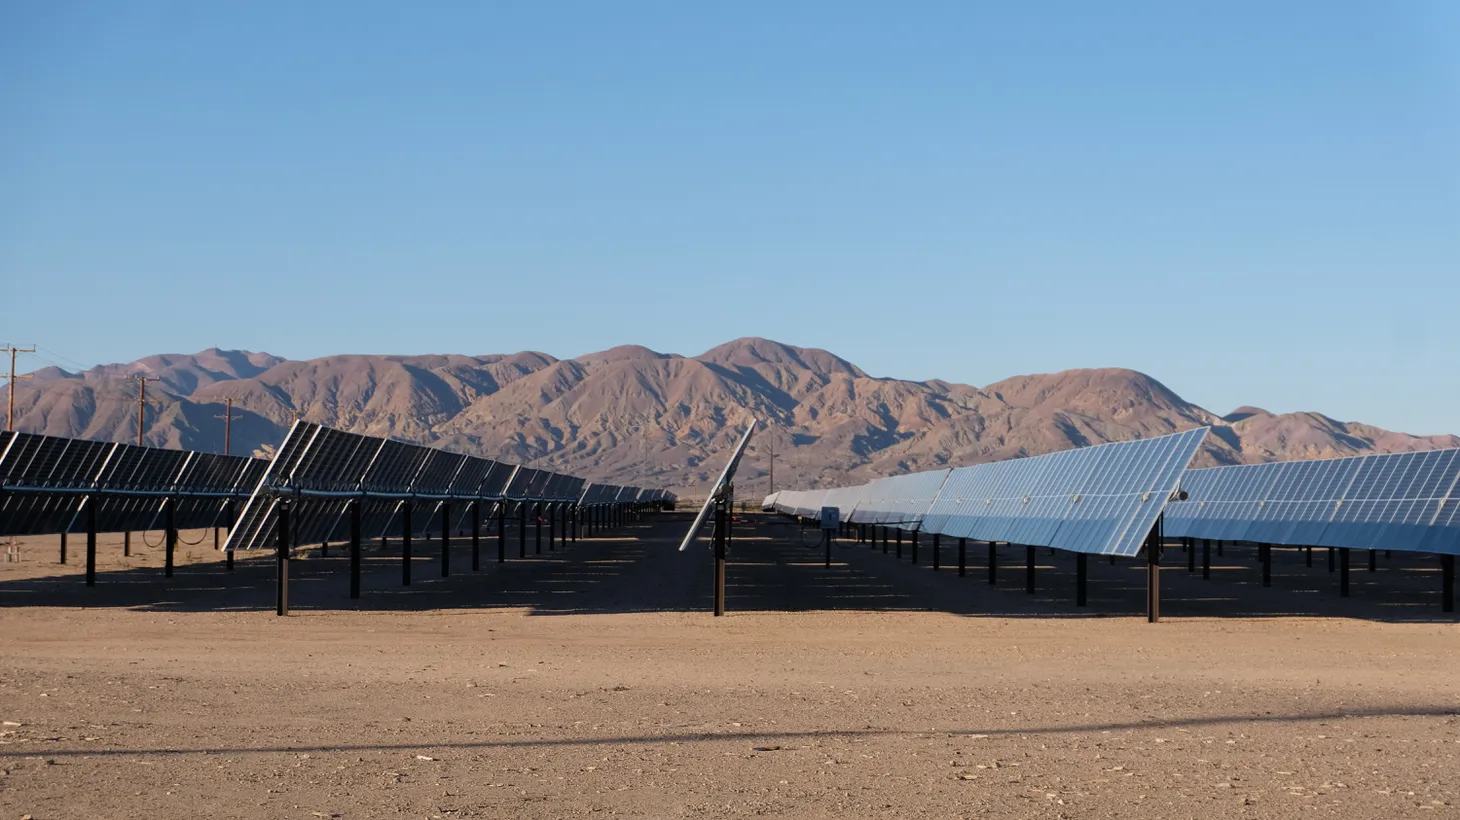 Finished solar panel modules are seen at a partially completed utility-scale solar facility in Daggett, CA.